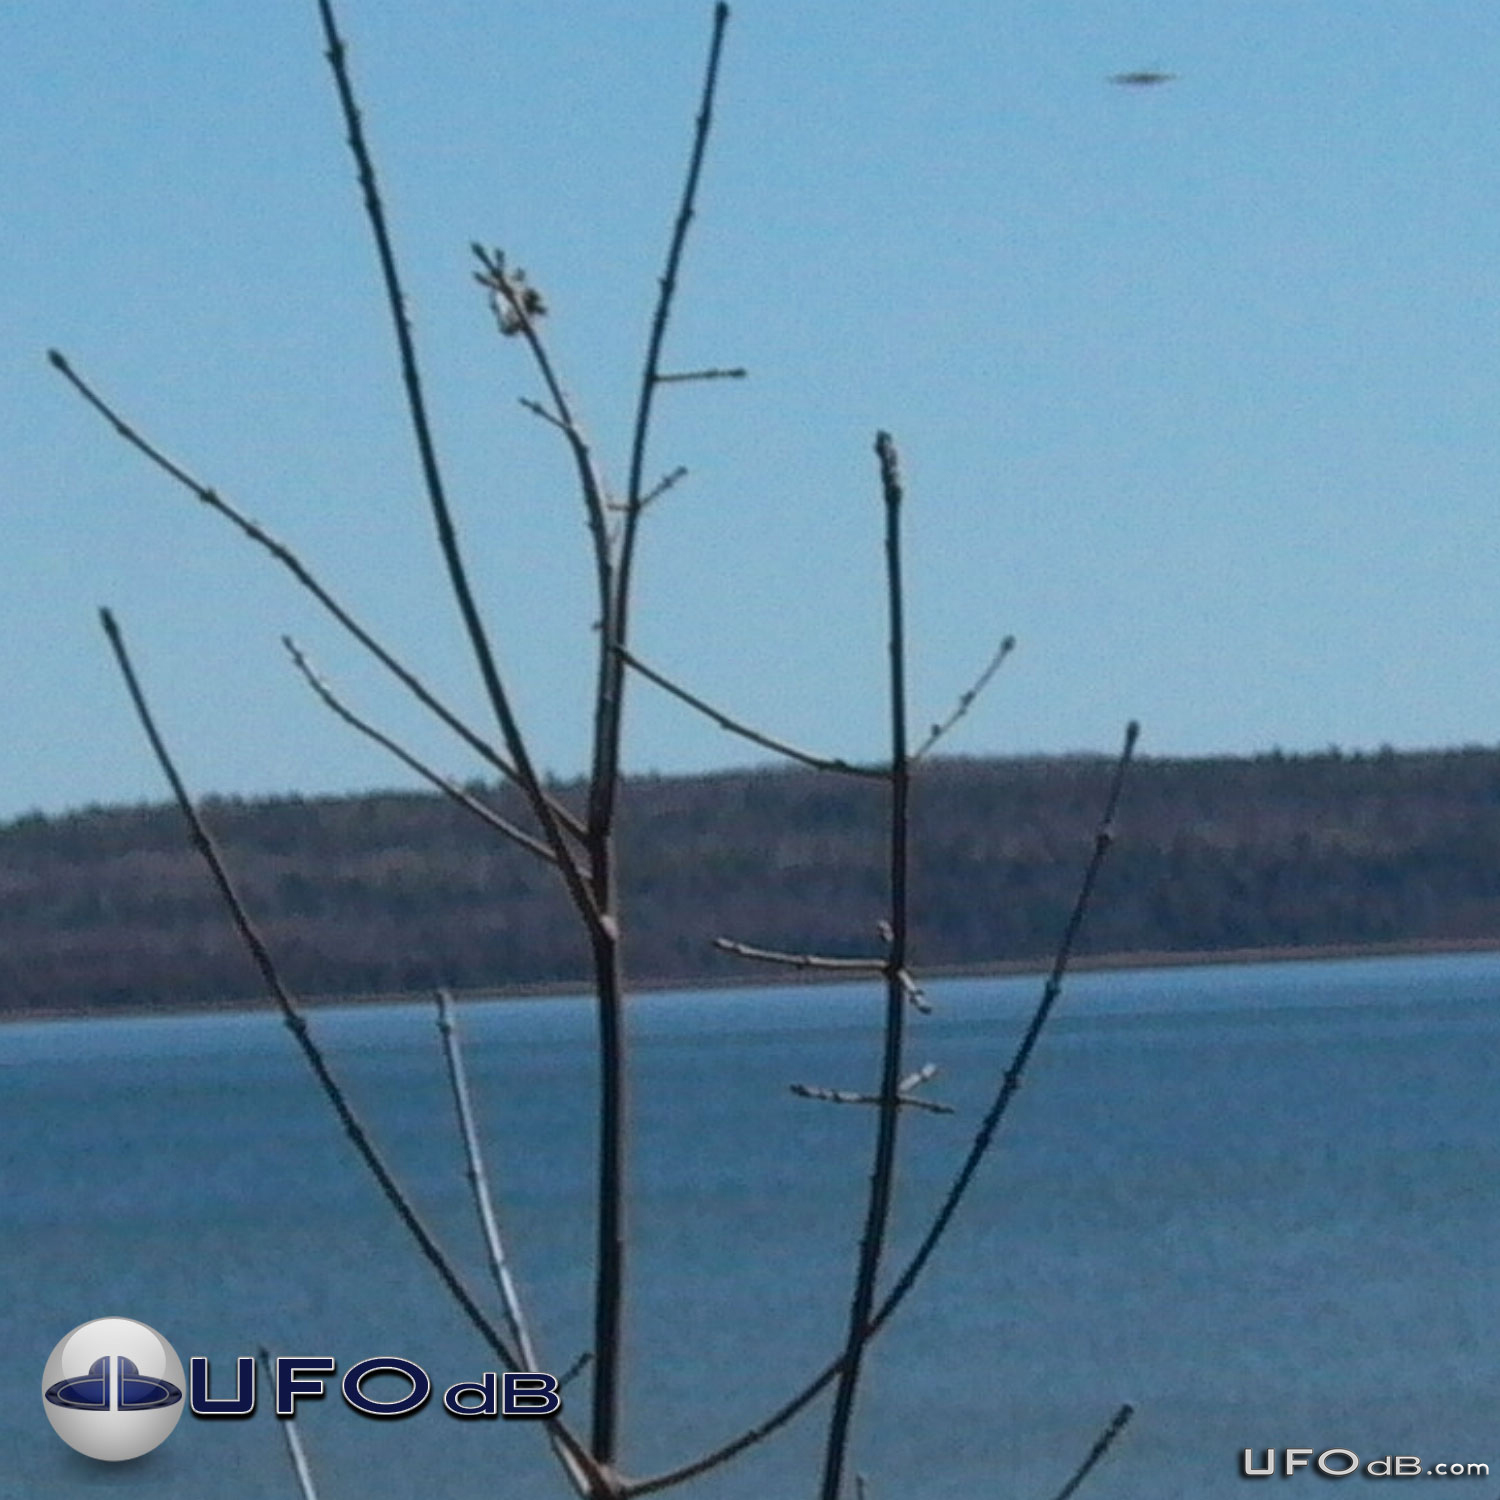 Lake Wosley Fisherman get a fast UFO on picture | Ontario, Canada 2011 UFO Picture #276-1